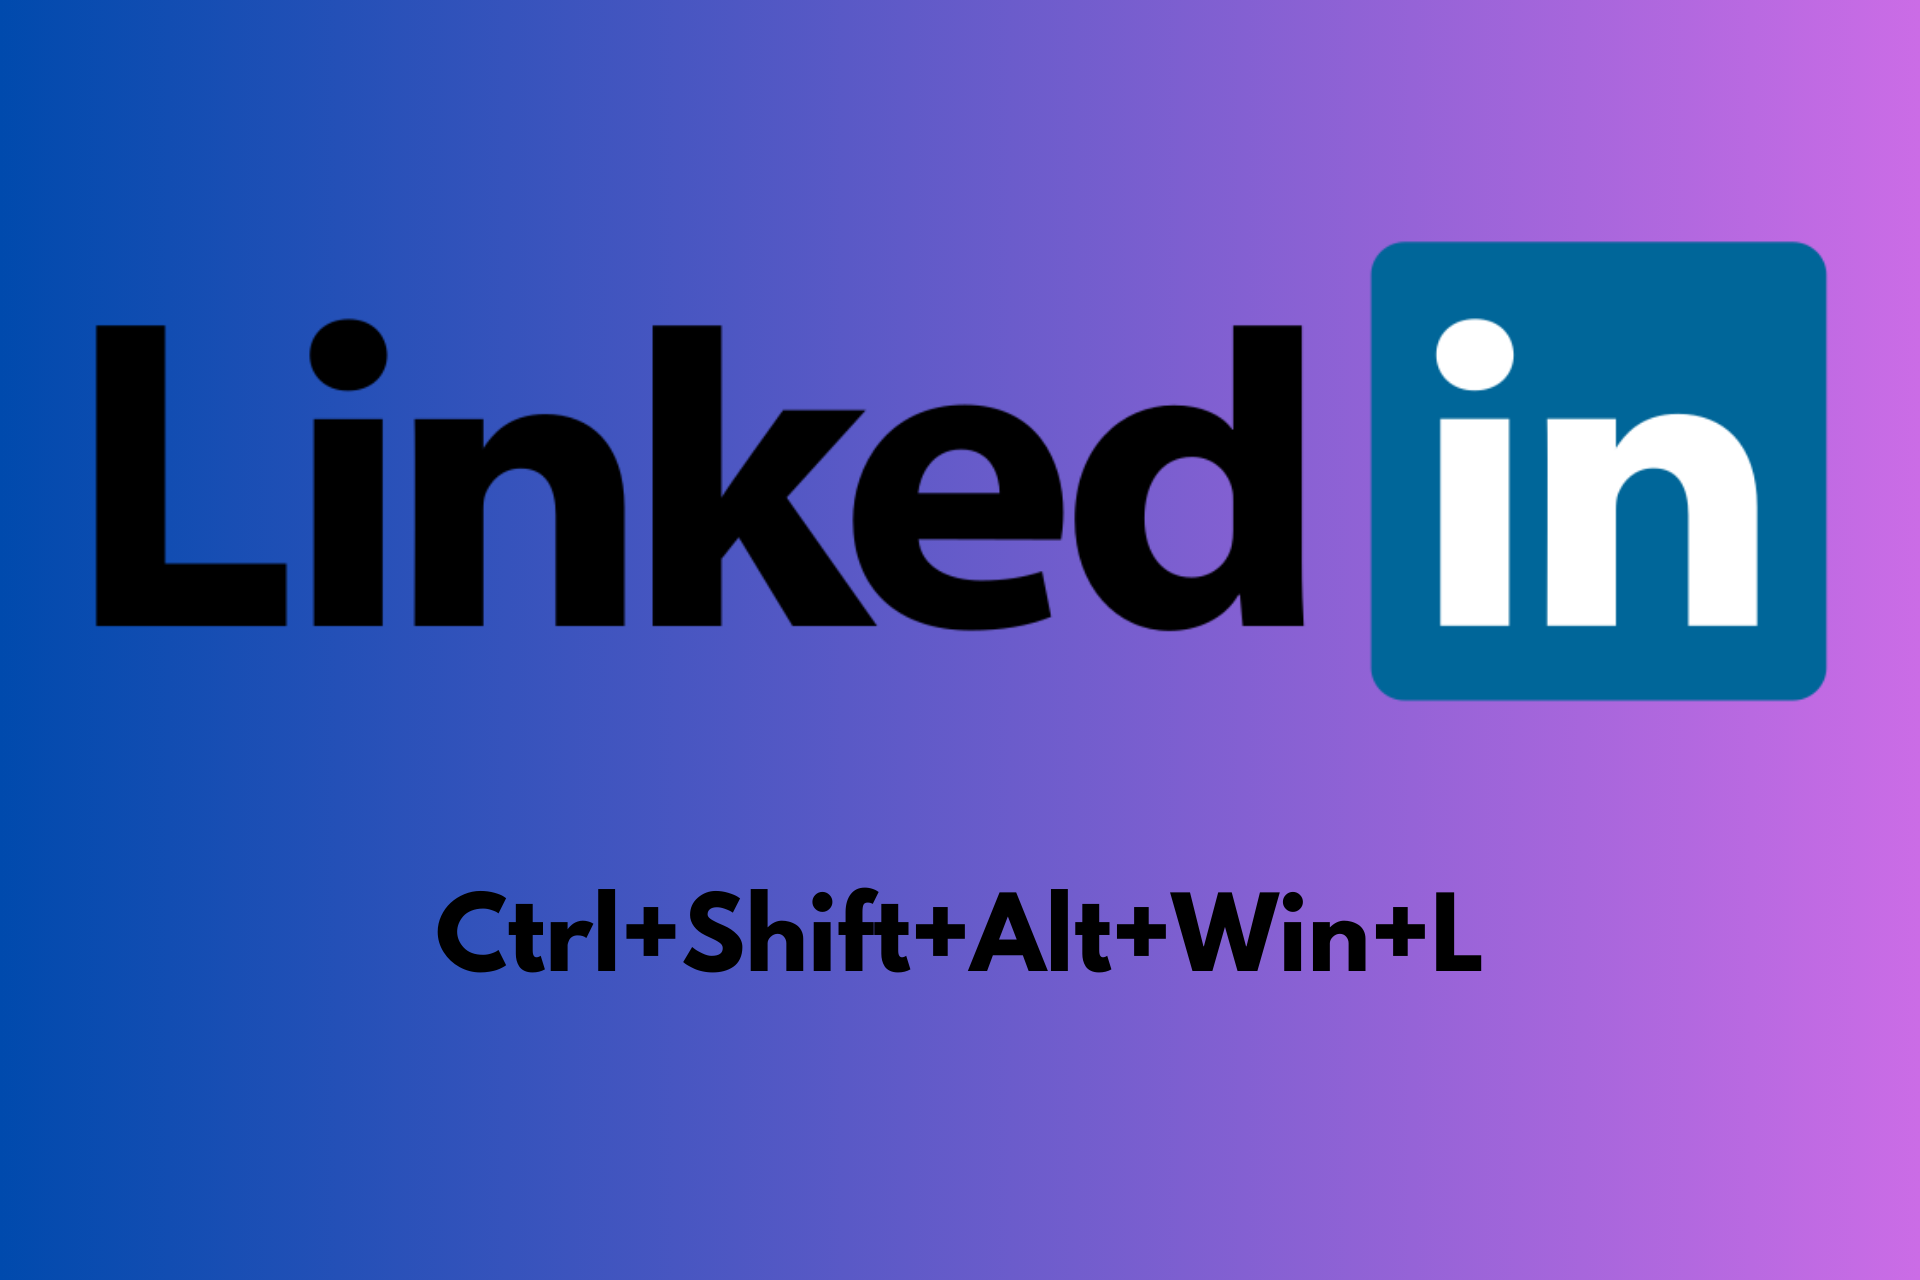 The LinkedIn Windows 11 shortcut is almost impossible to hit